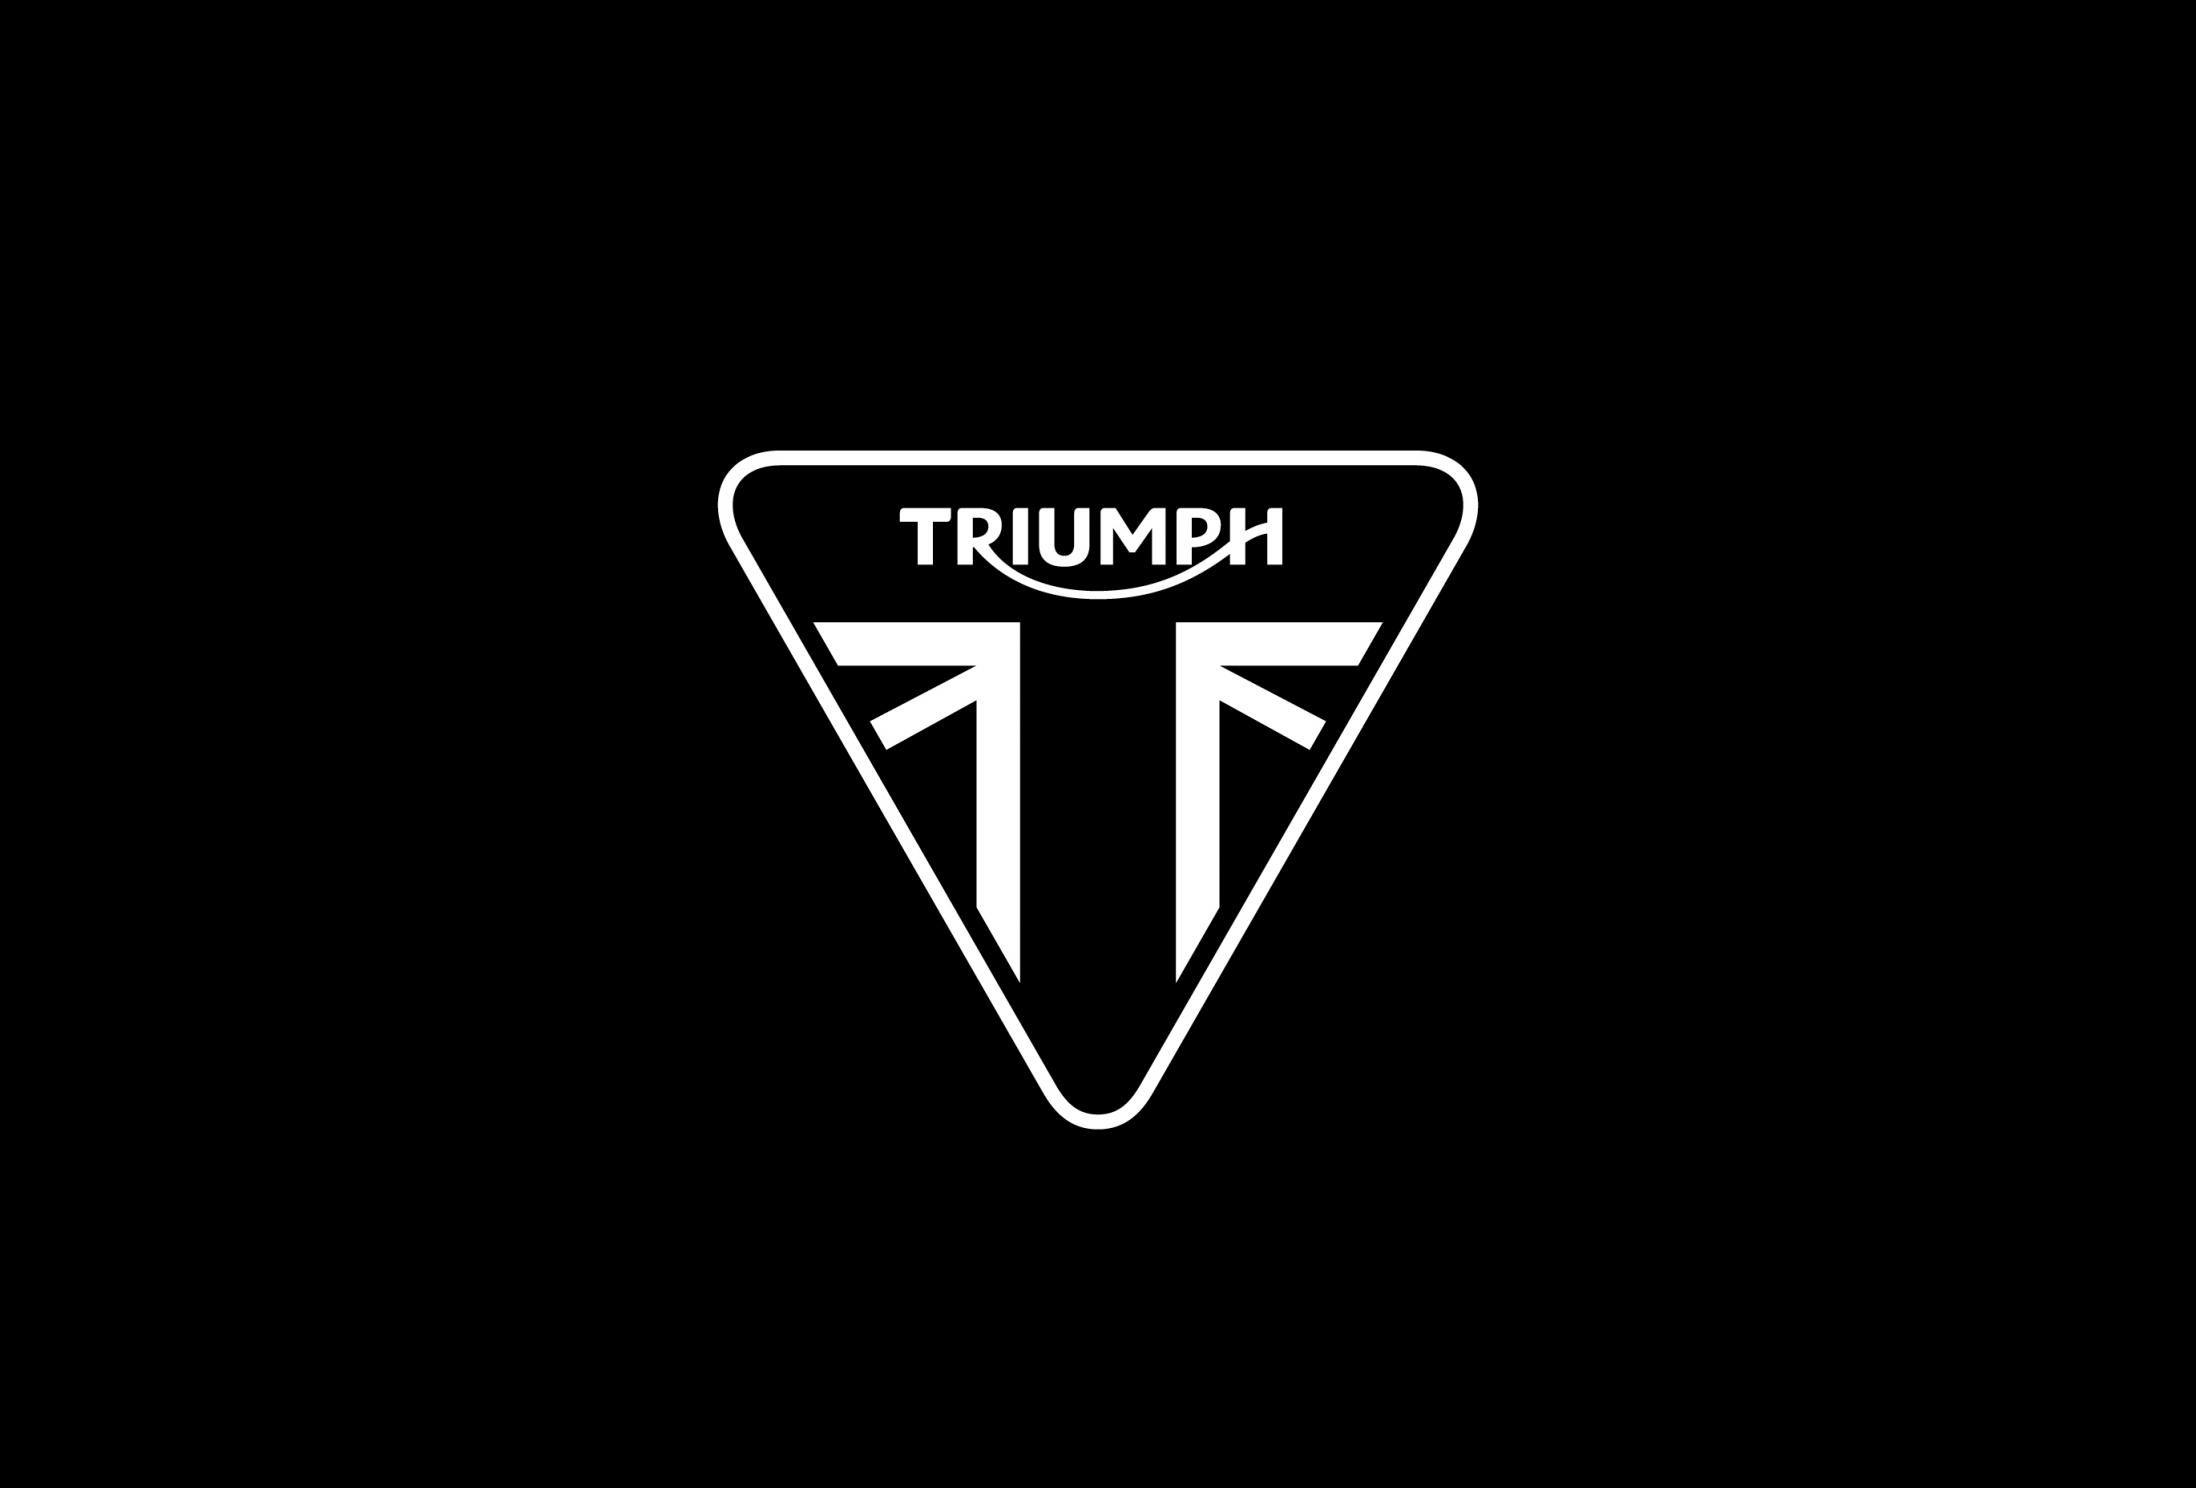 New Triumph Motorcycle Logo - Perth's Best Range Of New Ducati & Triumph Motorcycles